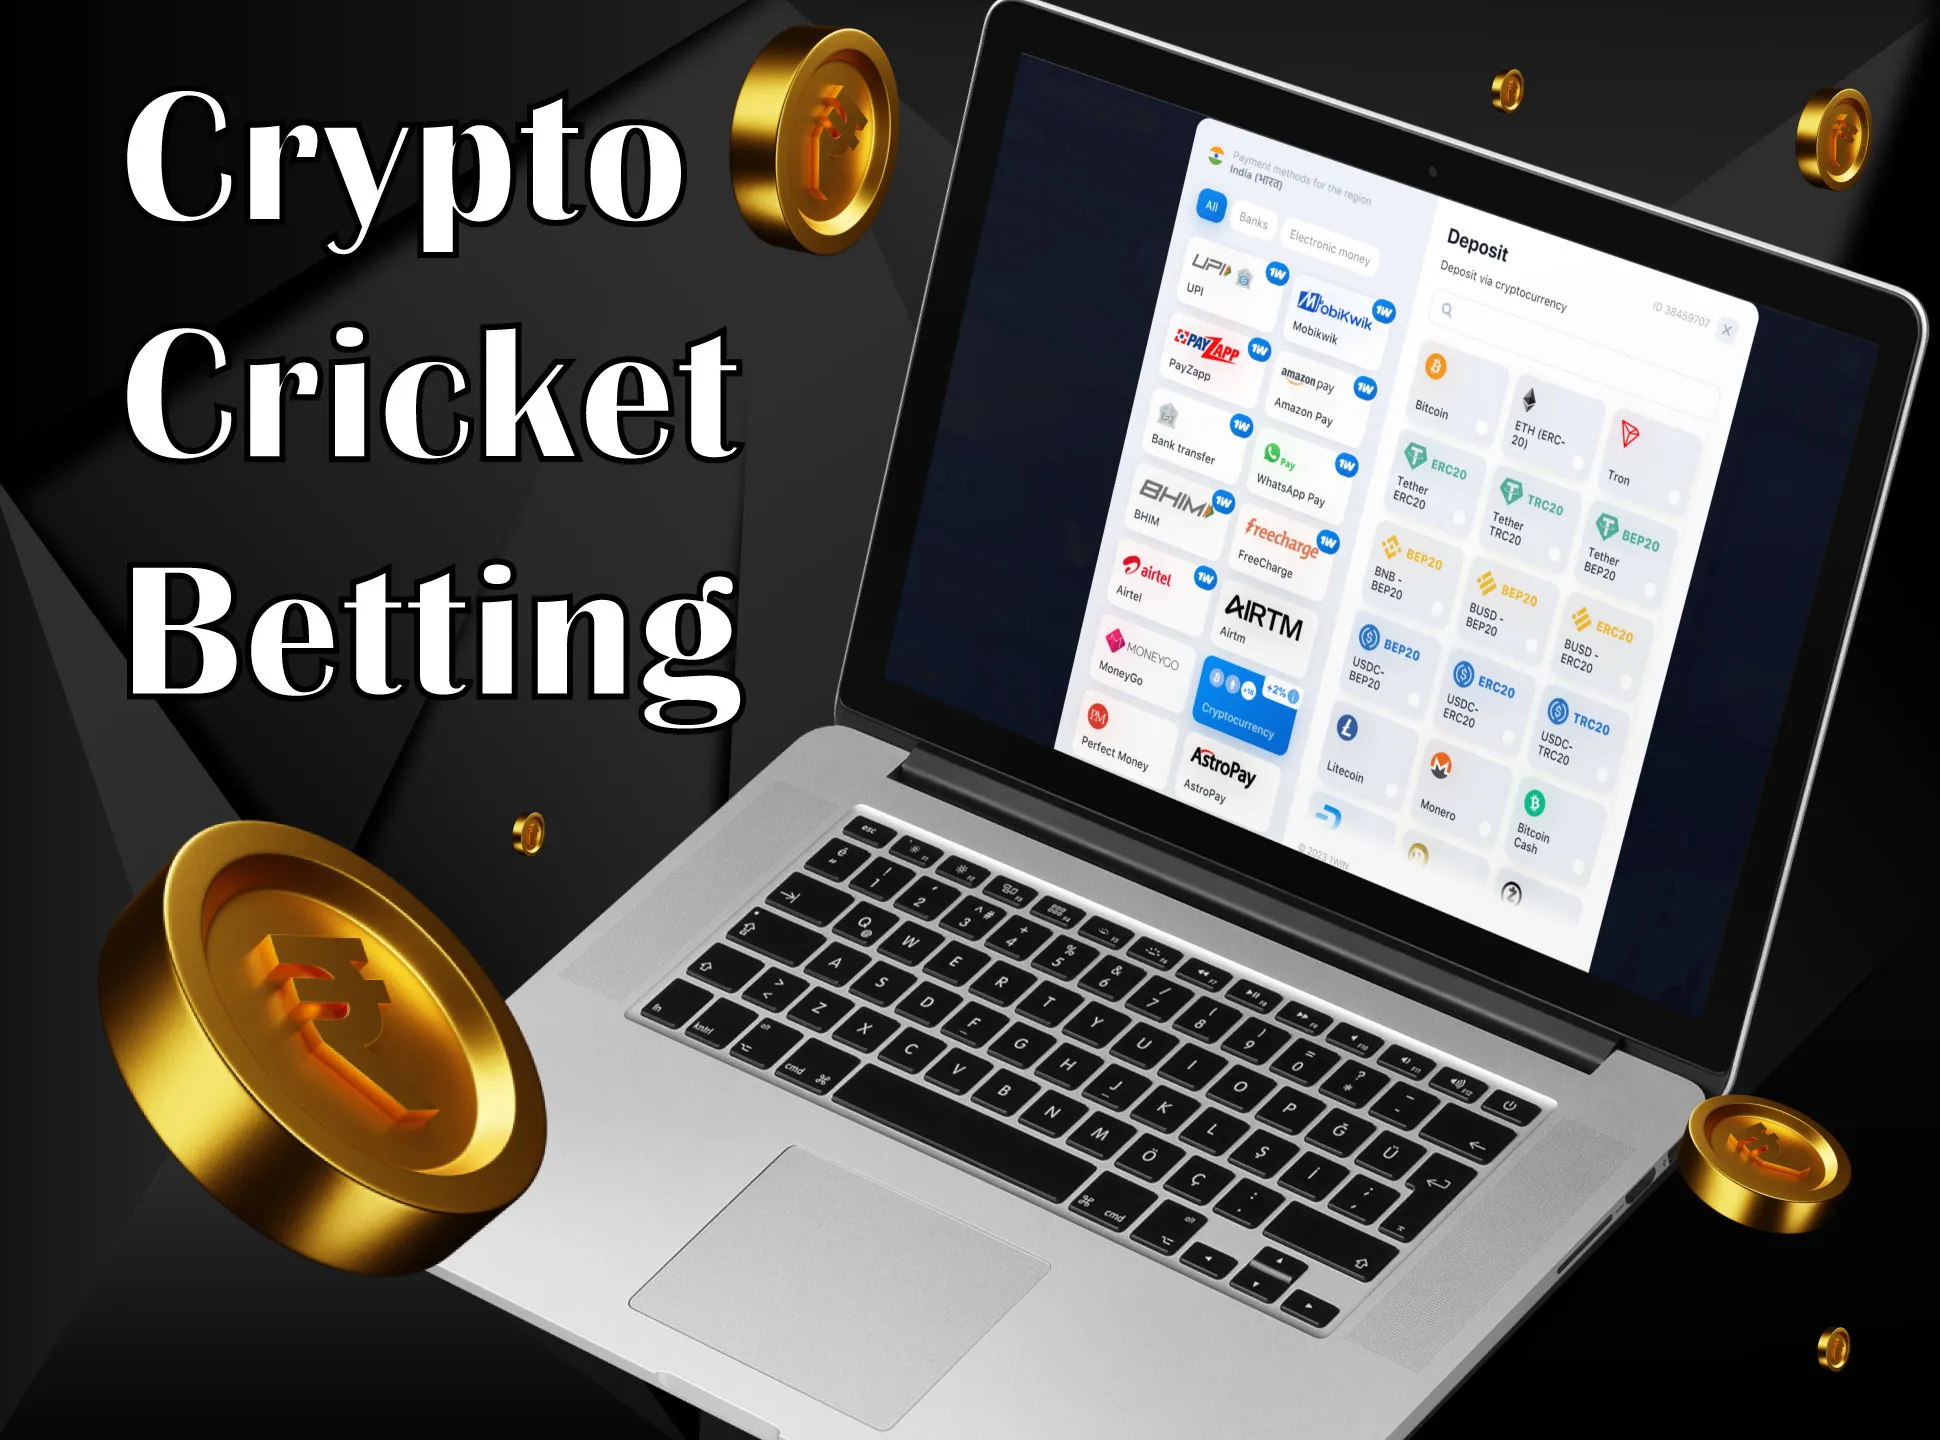 Place bets on cricket matches with cryptocurrency.